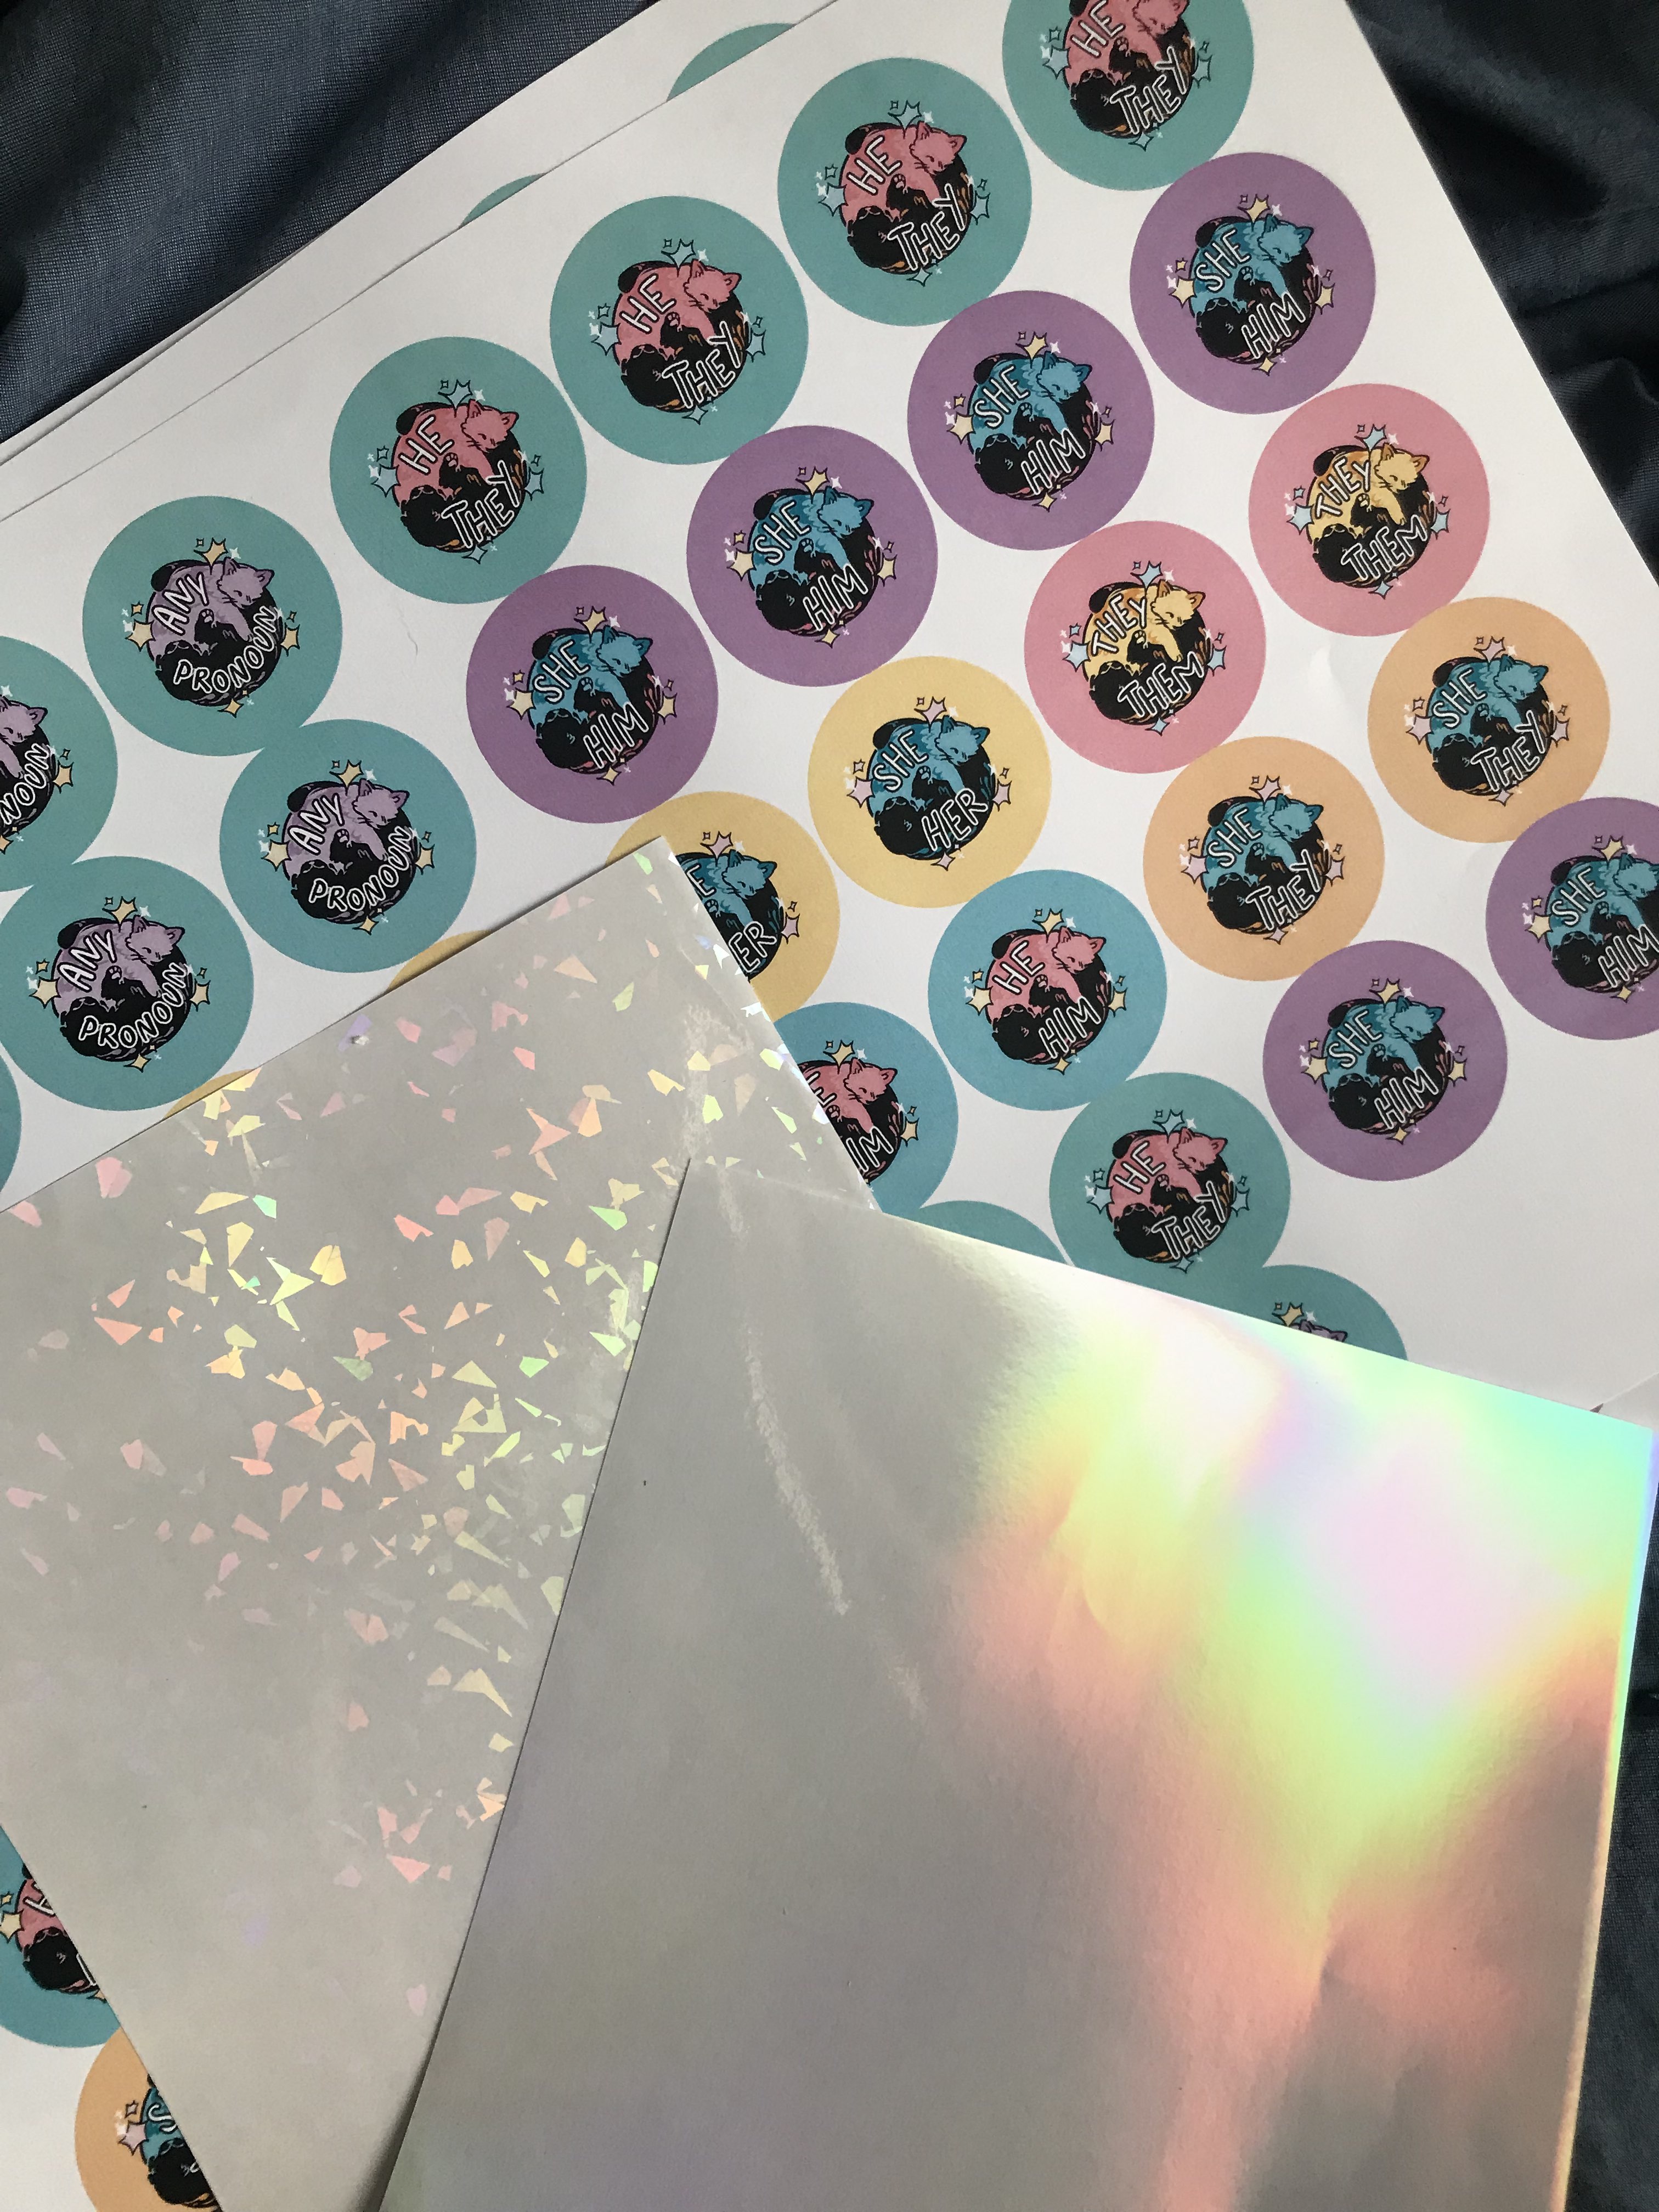 A photo of a piece of paper covered in printouts of a digital drawing ready to be turned into badges of cat-themed pronoun badges. There are also two holographic sheets with different patterns.